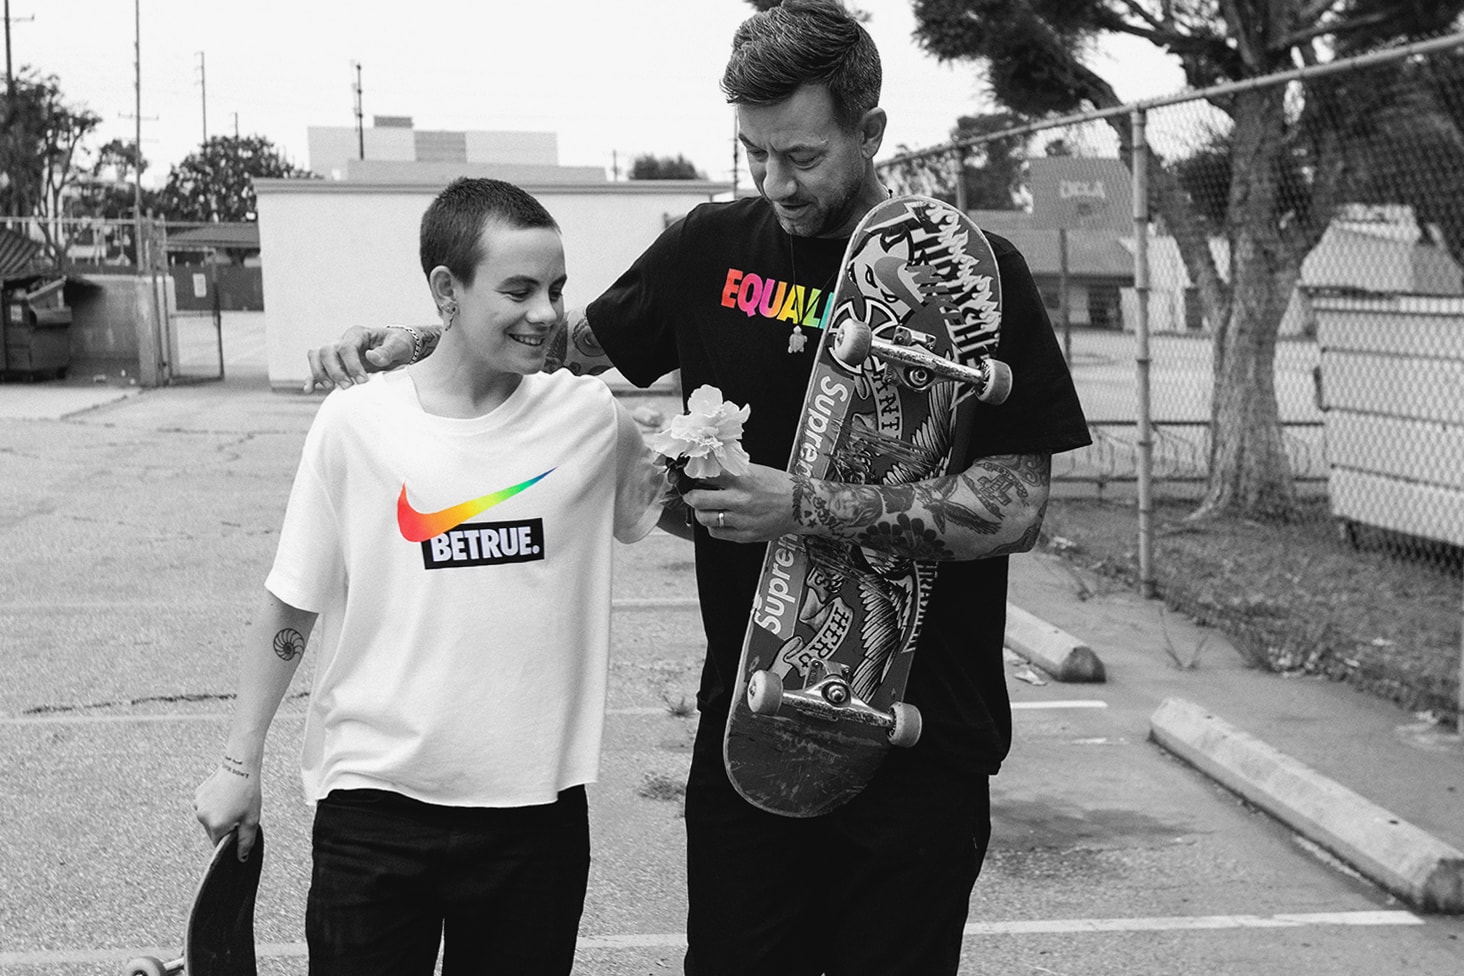 Brian Anderson Interview Lacey Baker Nike SB 2017 EQUALITY BETRUE skateboarding flower